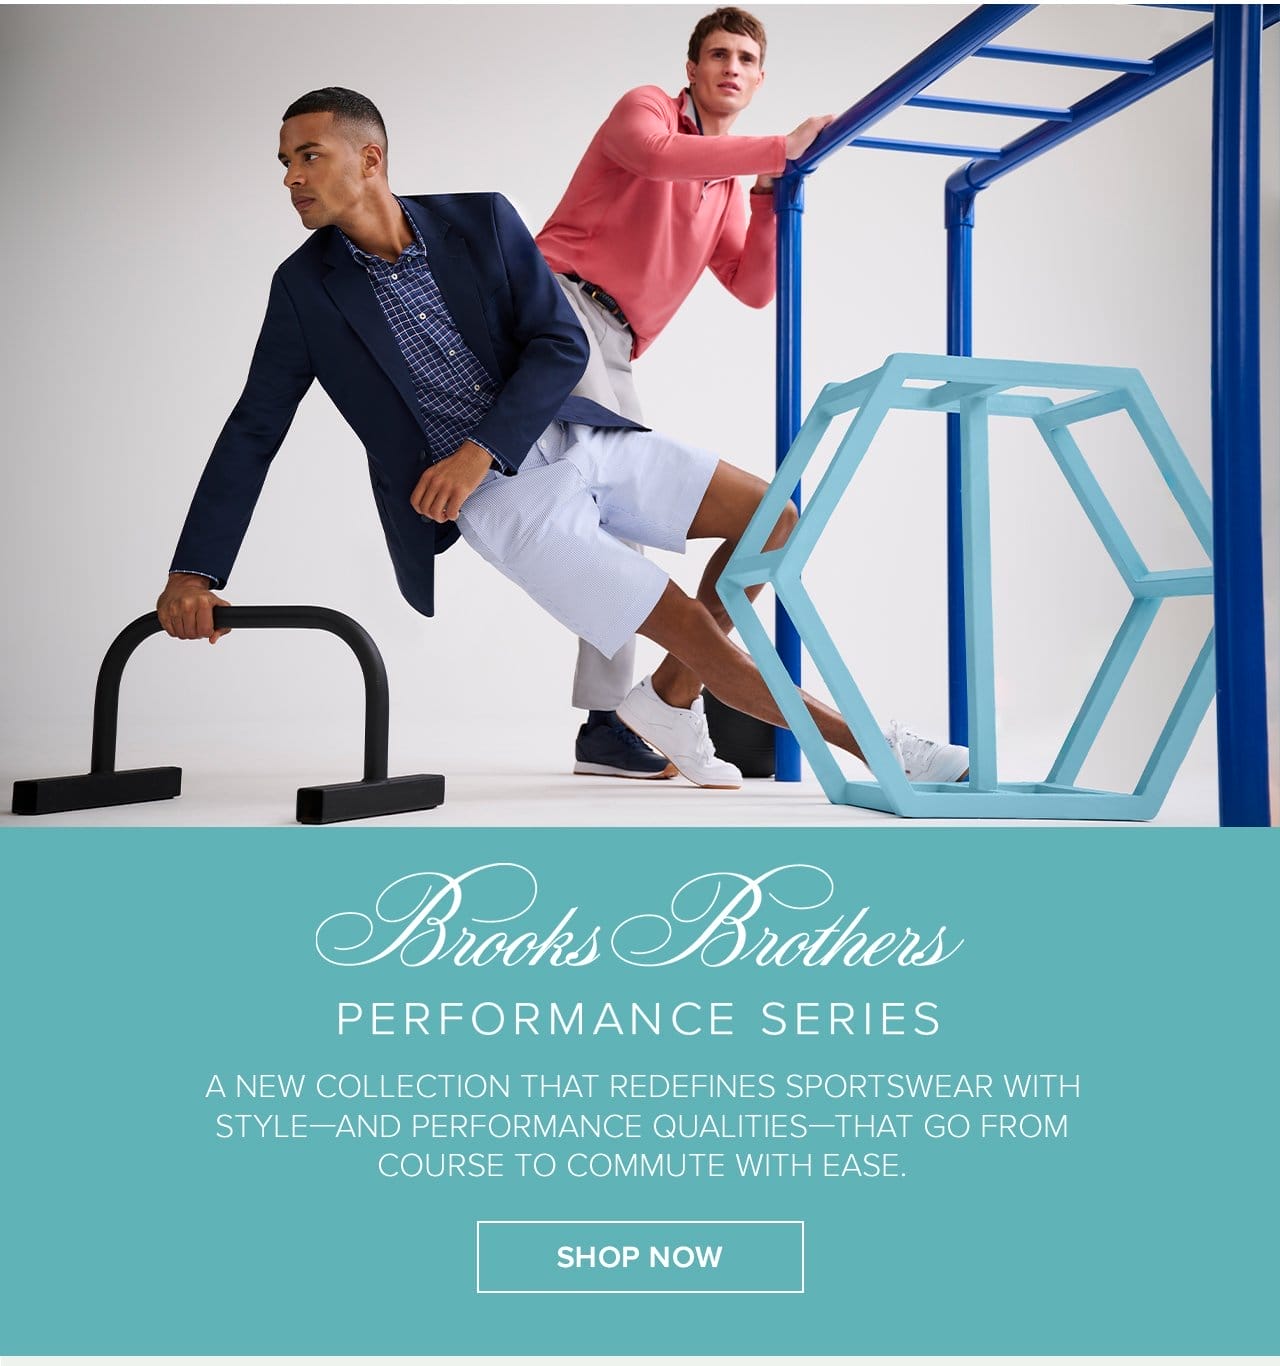 Brooks Brothers Performance Series A New Collection That Redefines Sportswear With Style - And Performance Qualities - That Go From Course To Commute With Ease. Shop Now